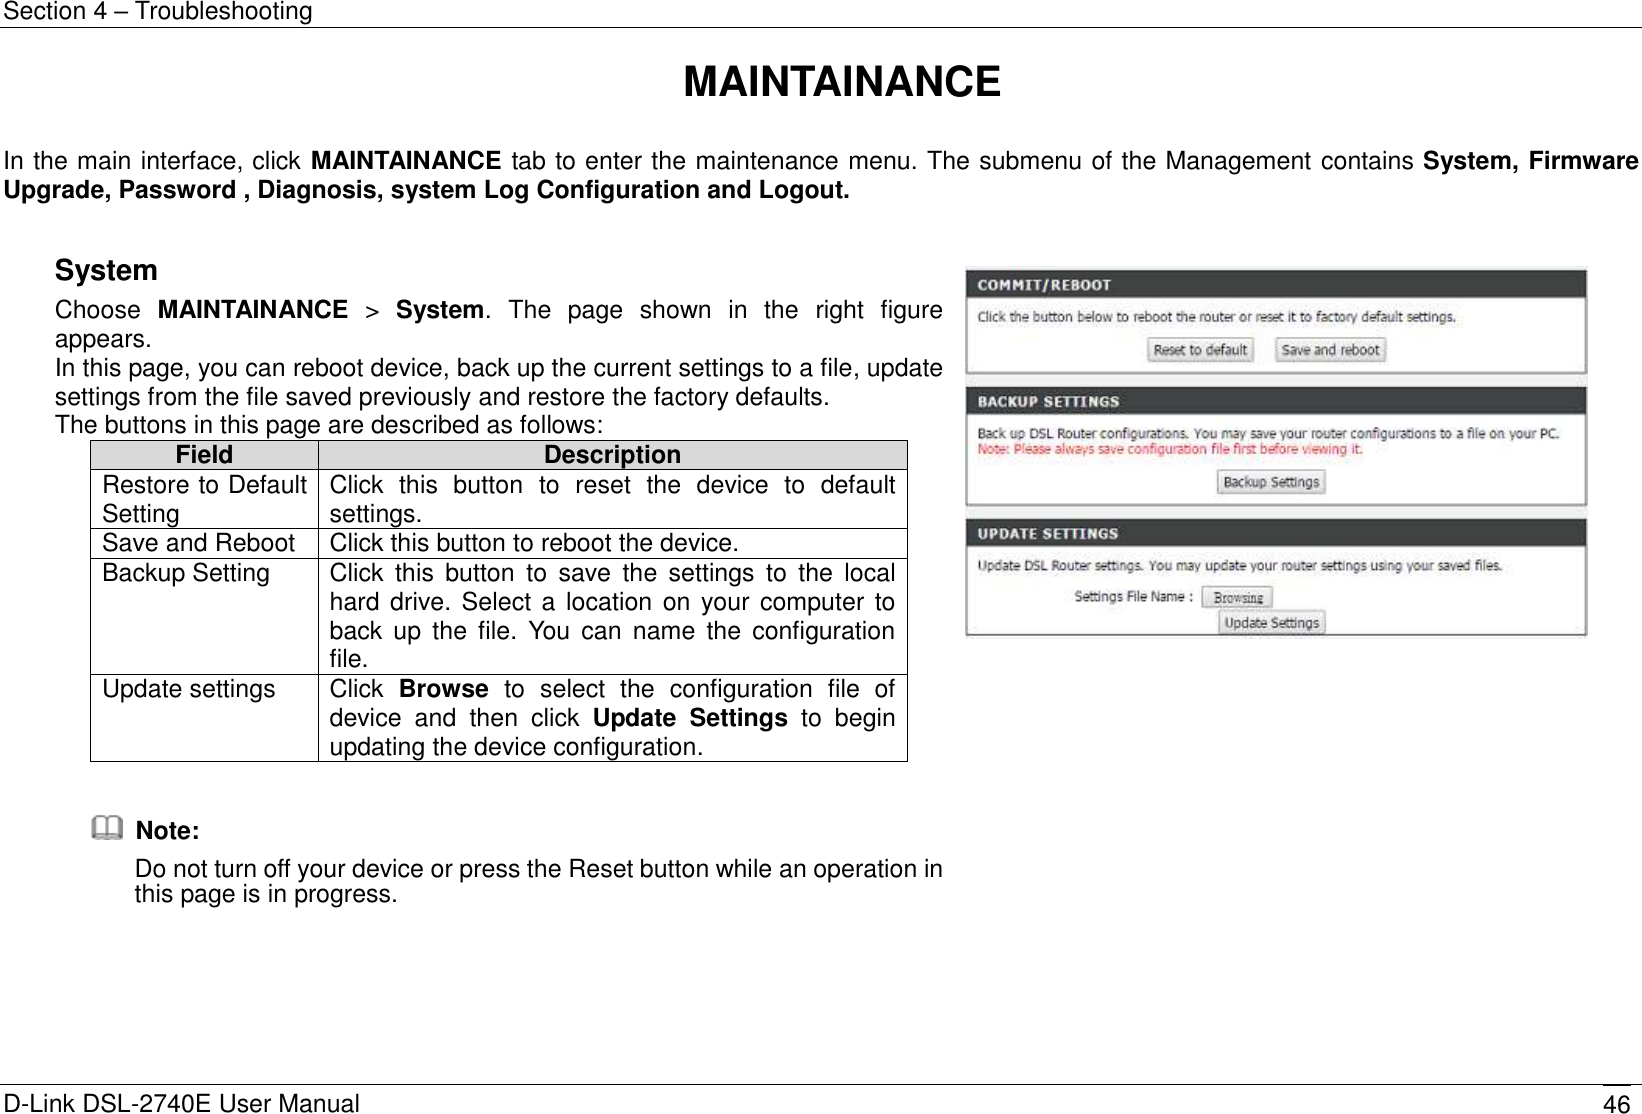 Section 4 – Troubleshooting D-Link DSL-2740E User Manual 46 MAINTAINANCE  In the main interface, click MAINTAINANCE tab to enter the maintenance menu. The submenu of the Management contains System, Firmware Upgrade, Password , Diagnosis, system Log Configuration and Logout.  System   Choose  MAINTAINANCE  &gt;  System.  The  page  shown  in  the  right  figure appears. In this page, you can reboot device, back up the current settings to a file, update settings from the file saved previously and restore the factory defaults. The buttons in this page are described as follows: Field Description Restore to Default Setting Click  this  button  to  reset  the  device  to  default settings. Save and Reboot Click this button to reboot the device. Backup Setting Click  this  button  to  save  the  settings  to  the  local hard drive. Select a  location on your computer to back  up  the file.  You  can  name  the  configuration file. Update settings Click  Browse  to  select  the  configuration  file  of device  and  then  click  Update  Settings  to  begin updating the device configuration.    Note: Do not turn off your device or press the Reset button while an operation in this page is in progress.    